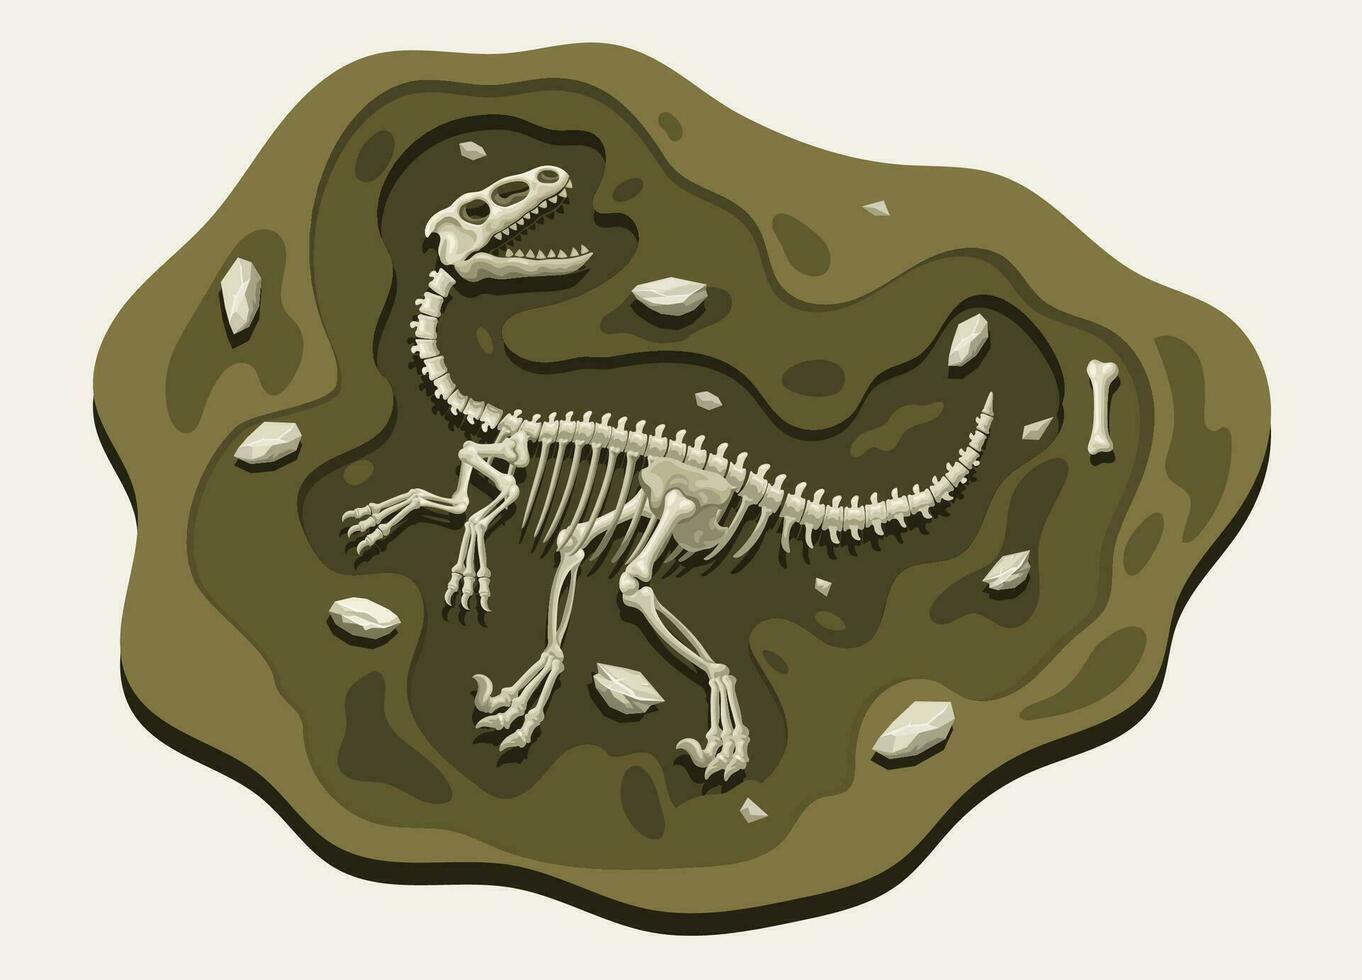 Raptor Dinosaurs Archaeology Fossil Cartoon Discover in the Ground vector